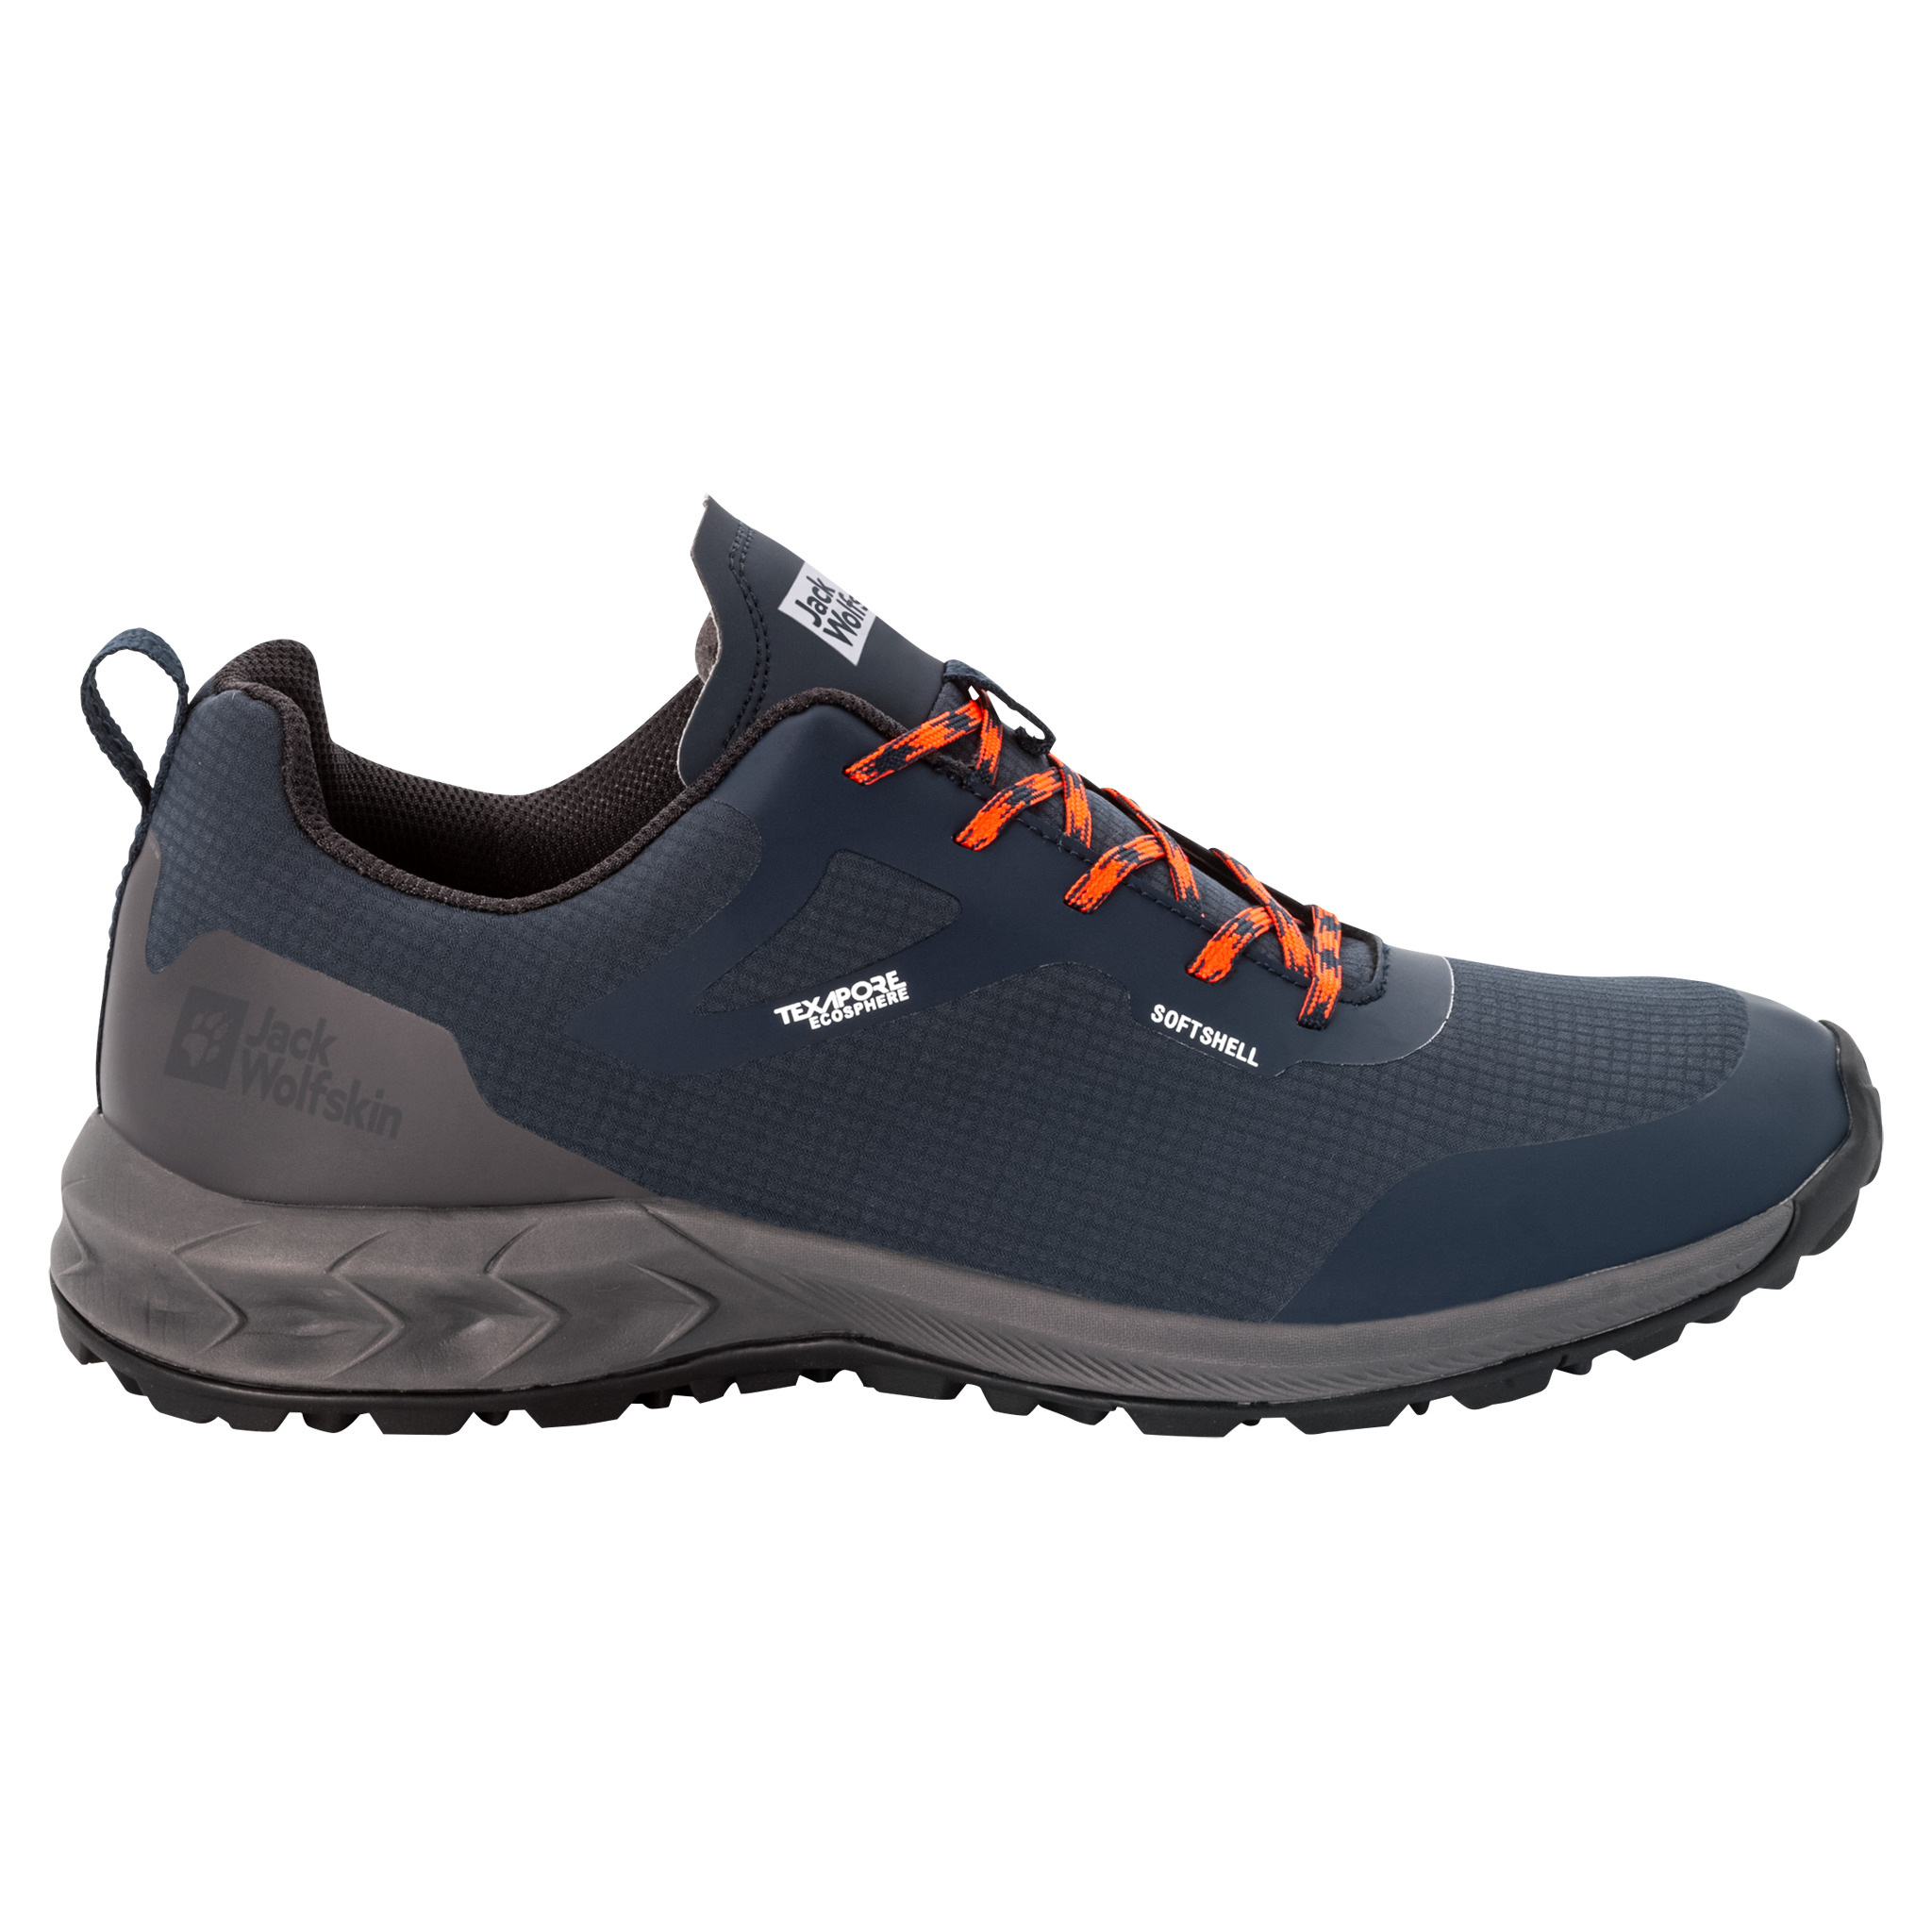 Chaussures de marche Jack Wolfskin Woodland Shell Texapore Low